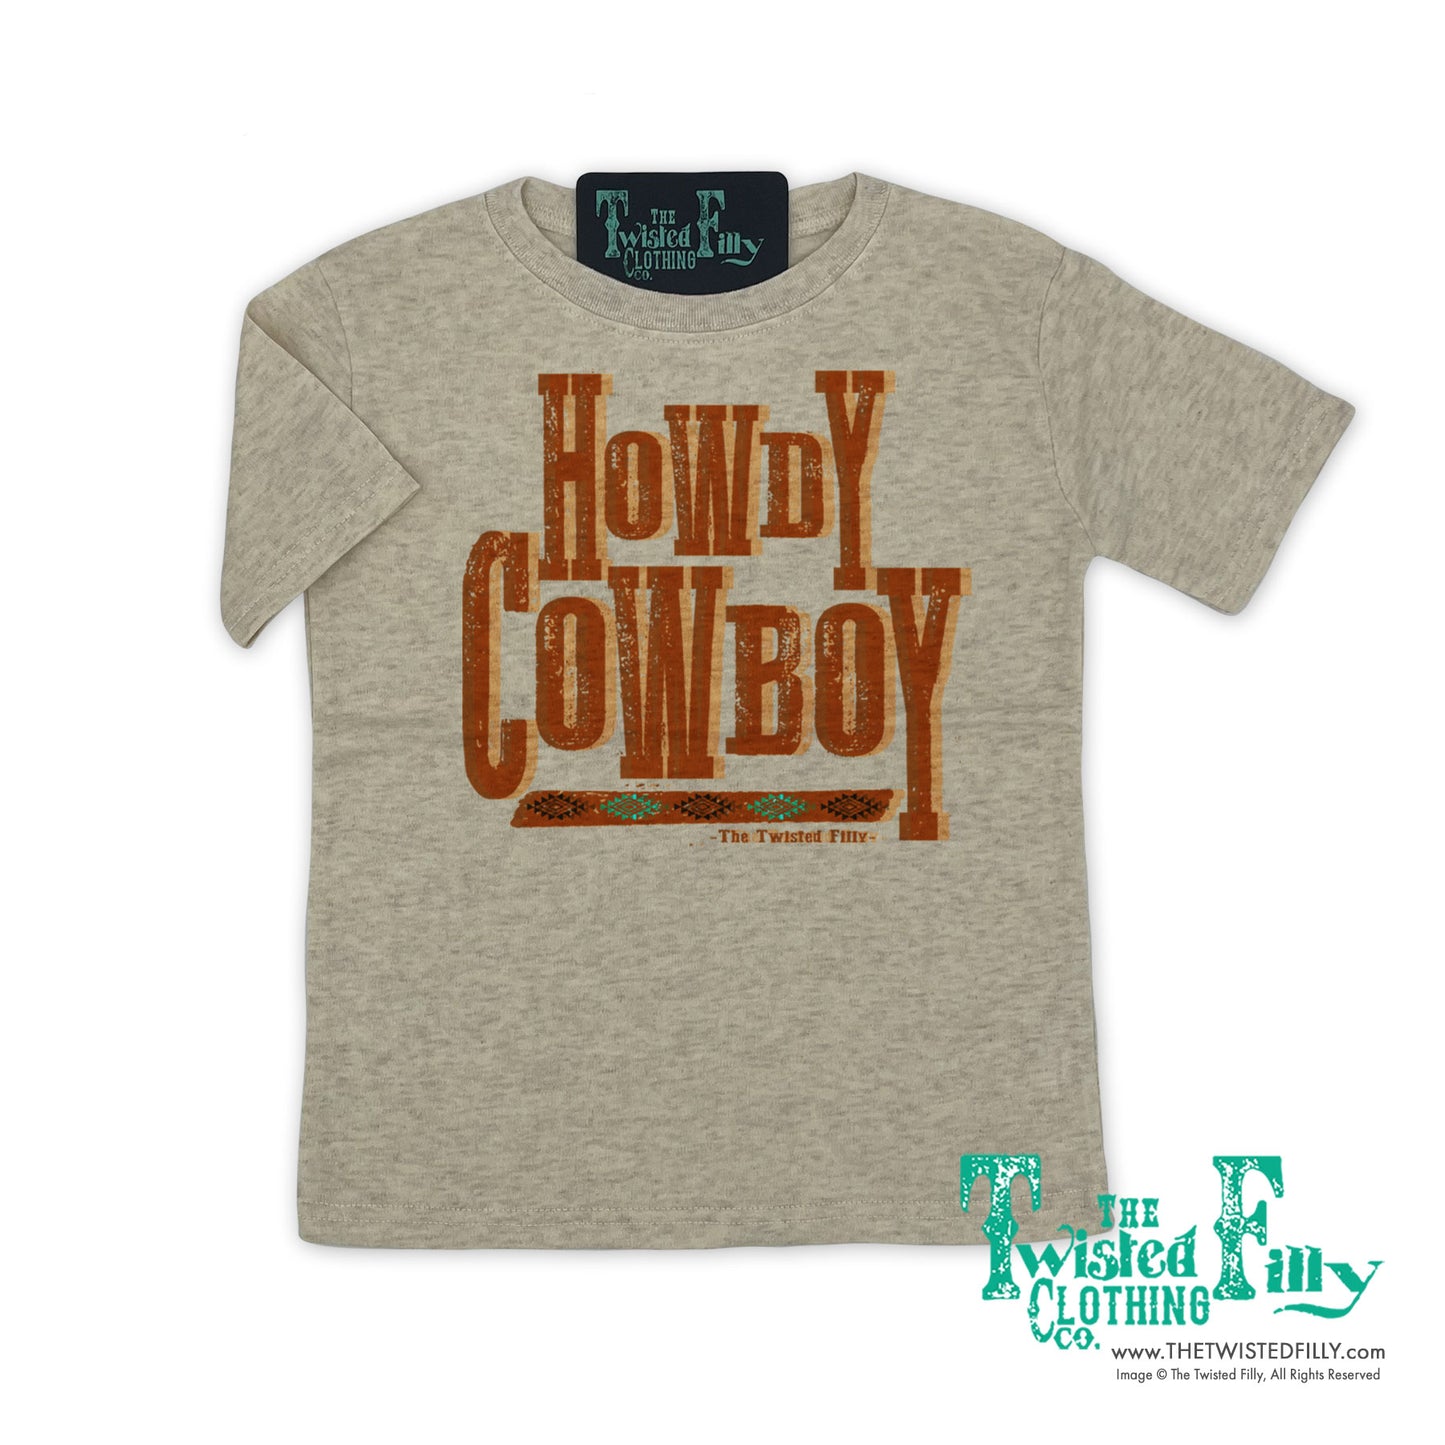 Howdy Cowboy - S/S Girls Toddler Tee - Assorted Colors